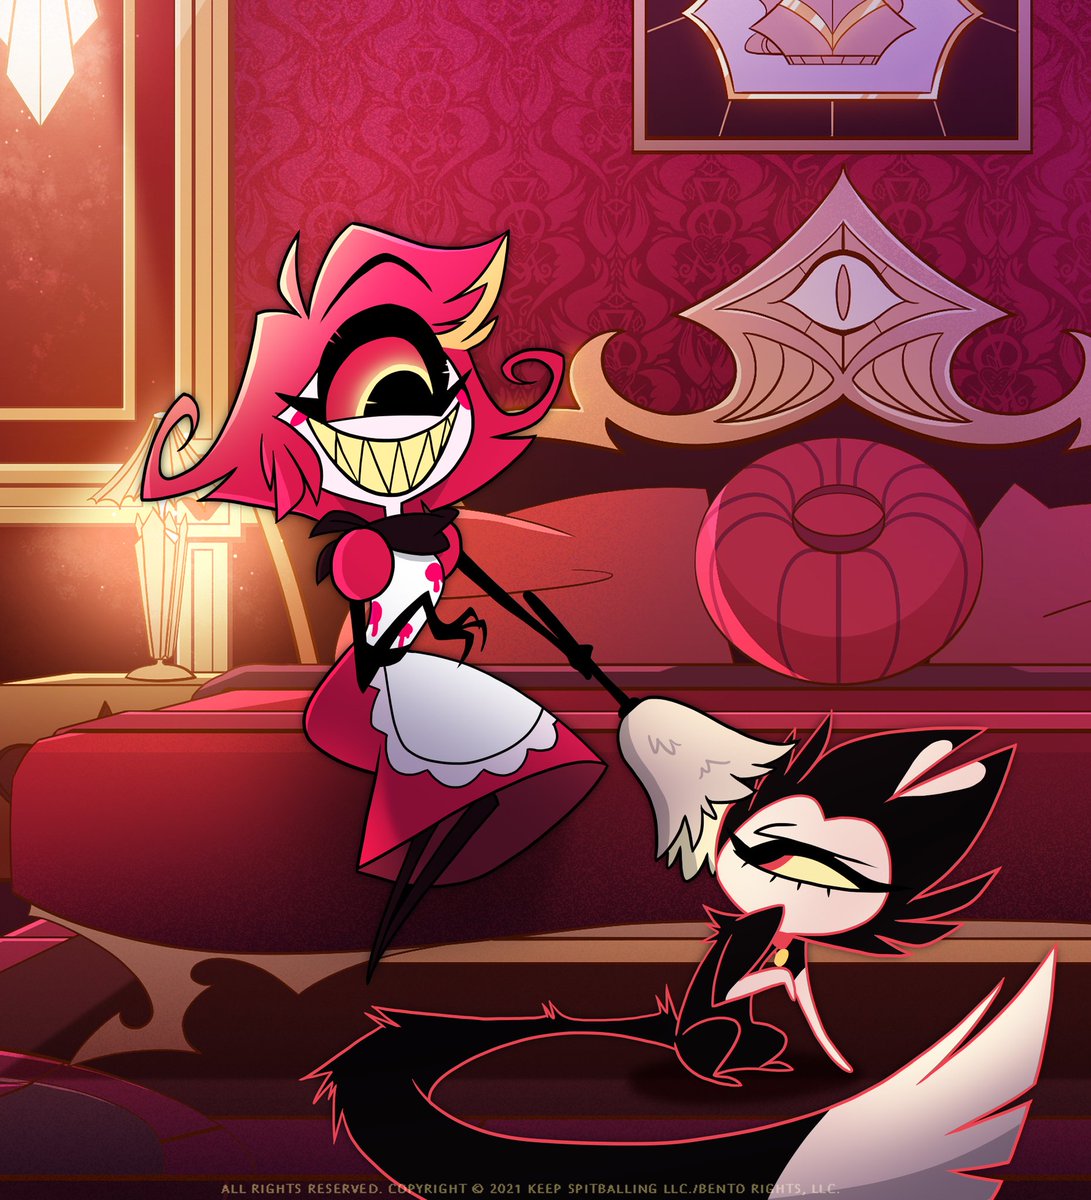 Niffty is likely the heterosexual rep in Hazbin Hotel, but theories about her possibly being in the closet are intriguing. #HazbinHotel